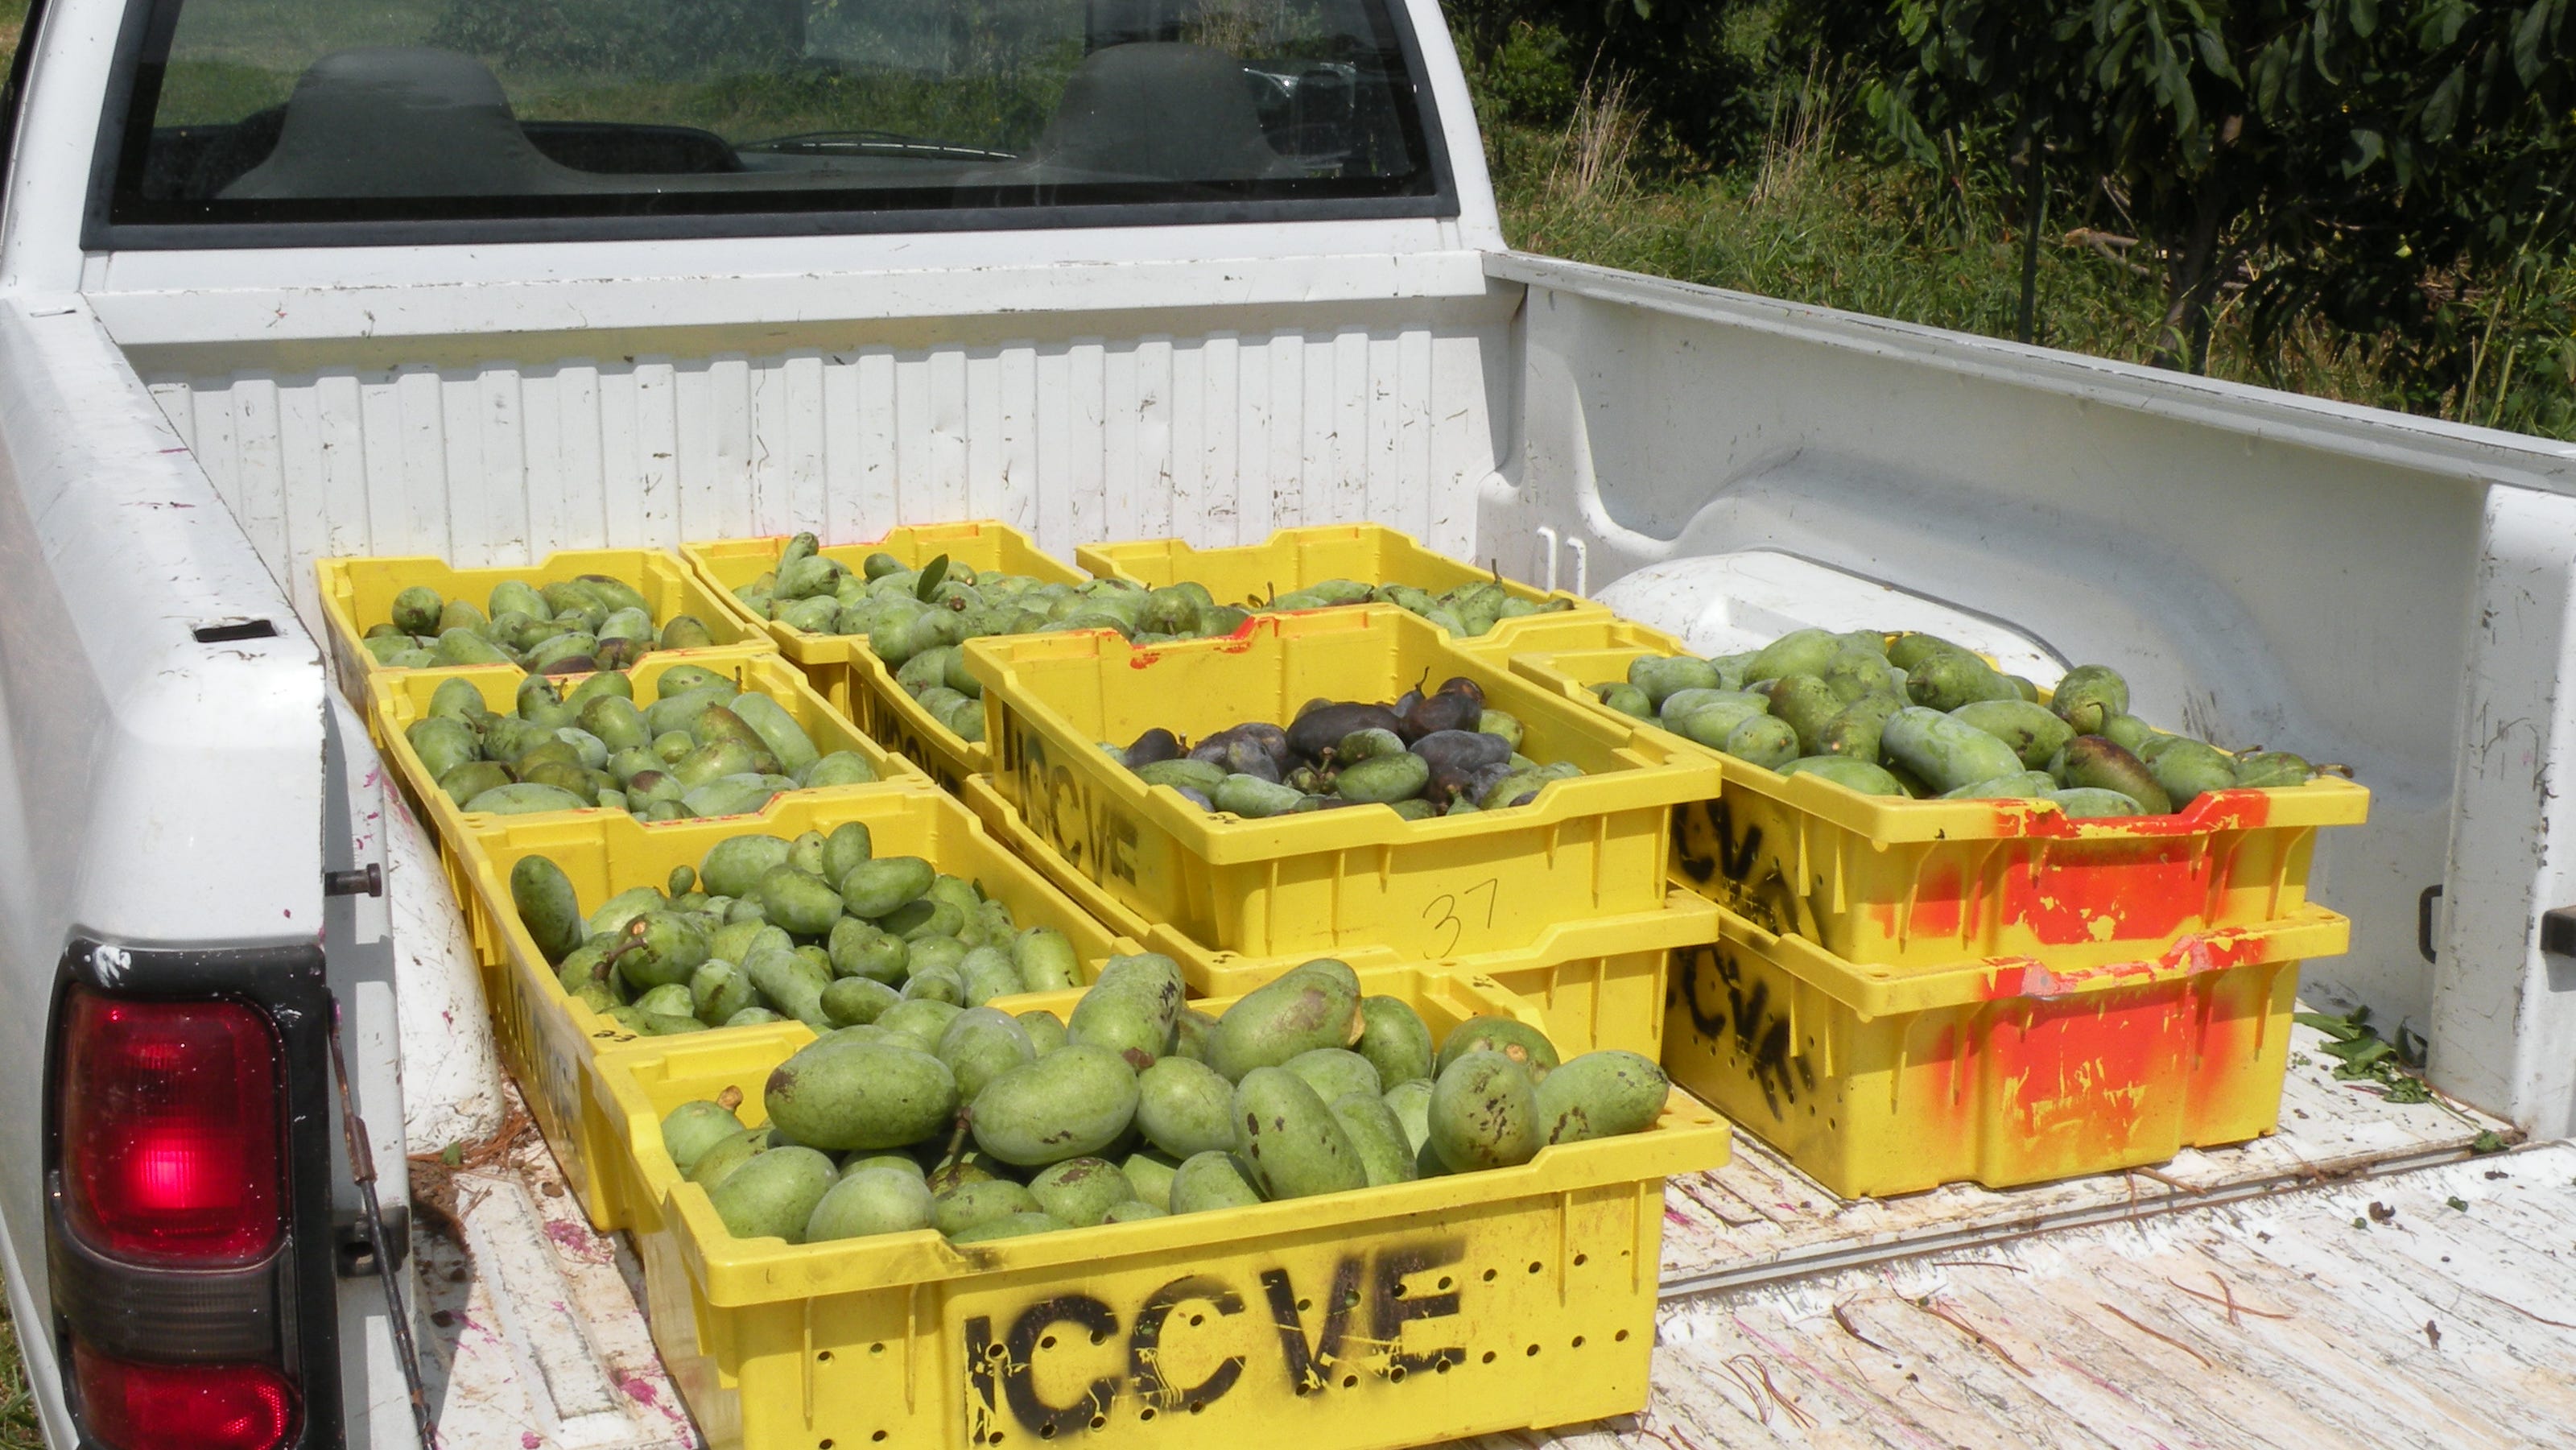 Missouri researchers, hobbyists learn how to breed, preserve pawpaws - News-Leader